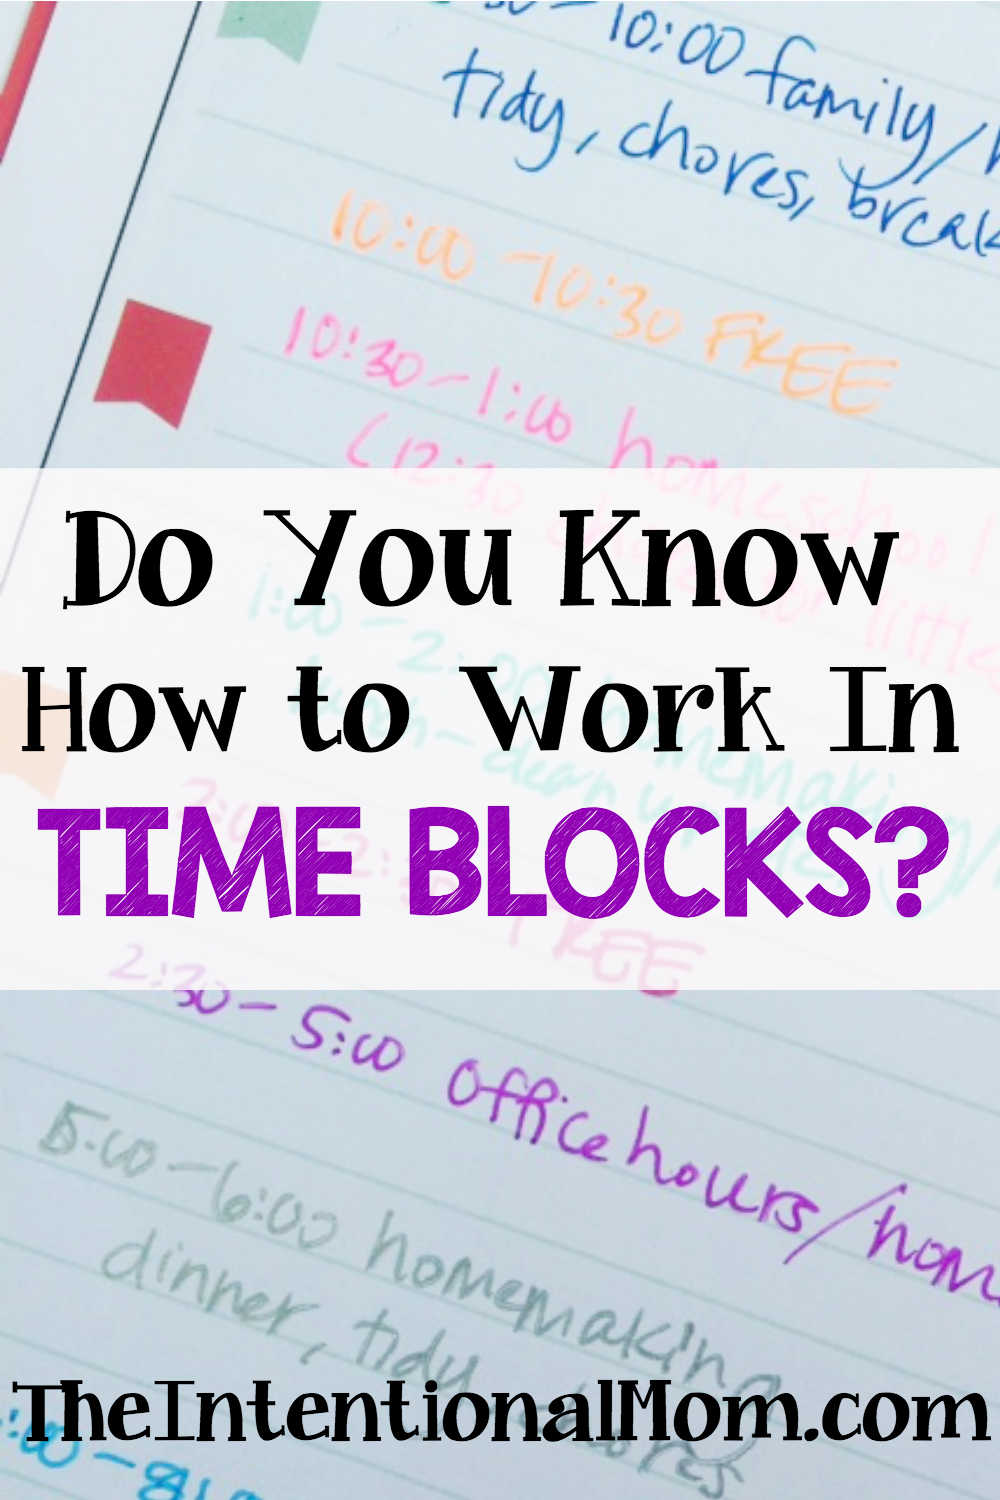 Do You Know How to Work In Time Blocks?